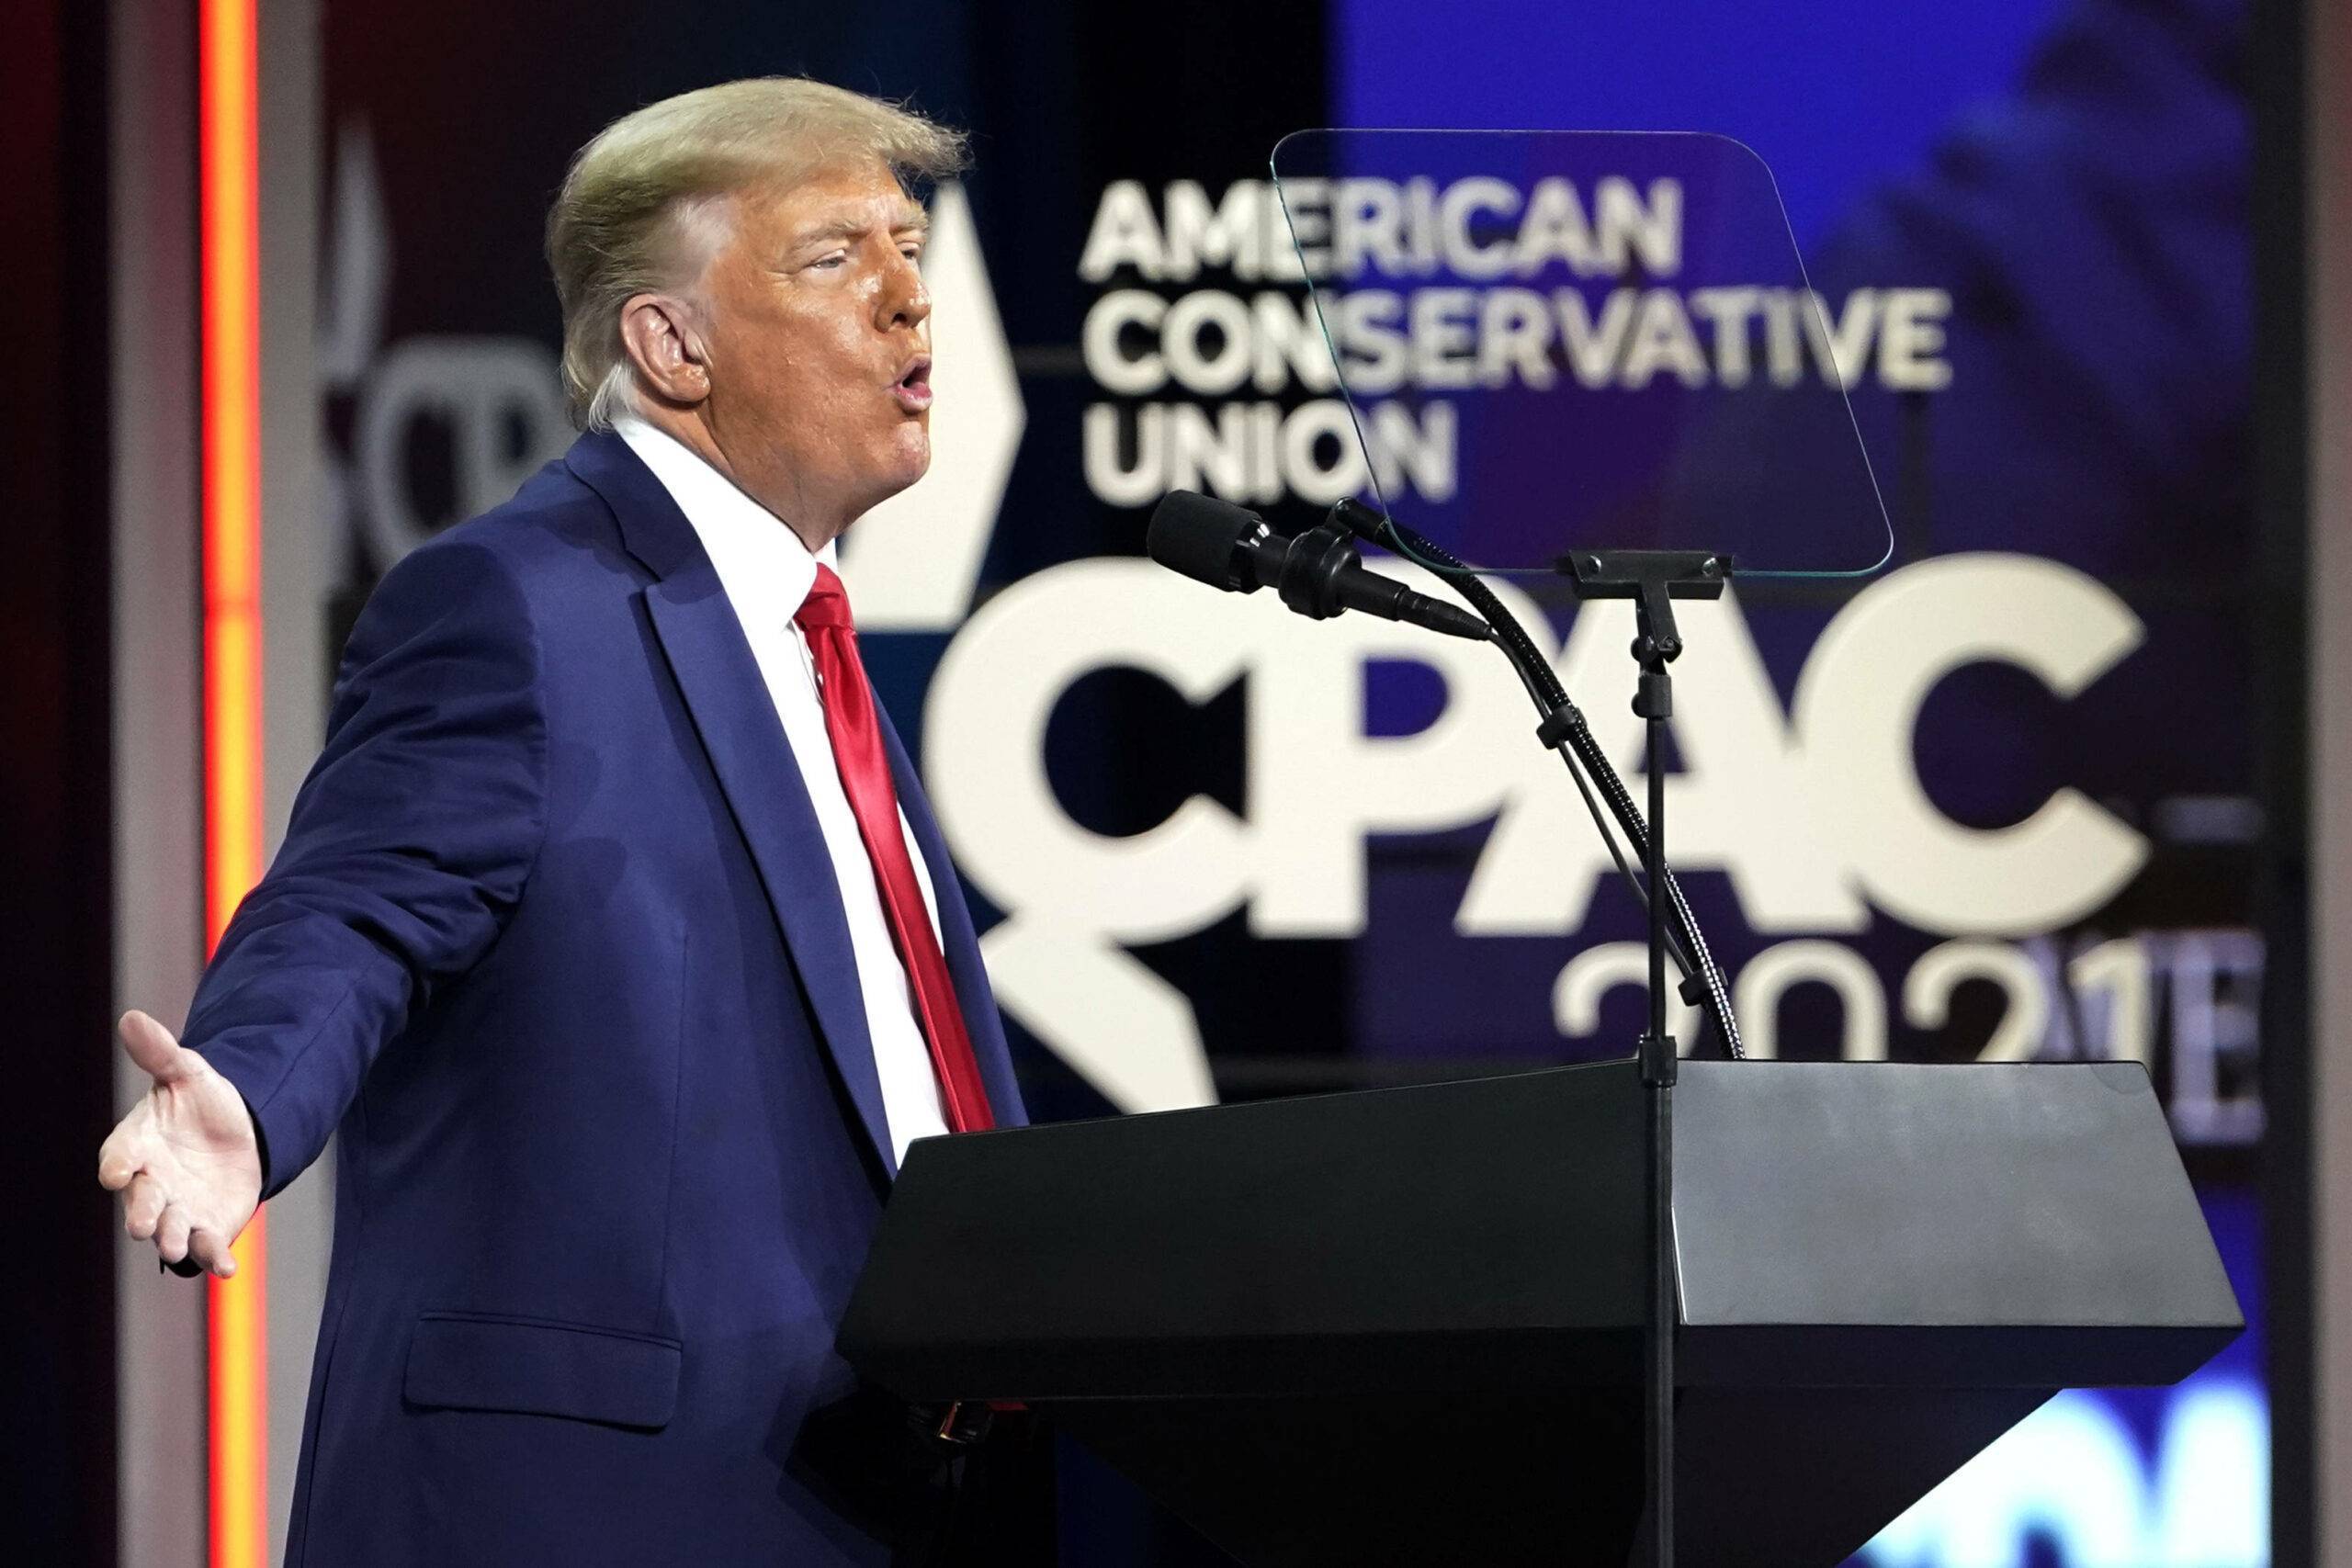 Former President Donald Trump speaks at the Conservative Political Action Conference (CPAC), Sunday, Feb. 28, 2021, in Orlando, Fla. (AP Photo/John Raoux)/FLJR131/21059859838158//2103010120